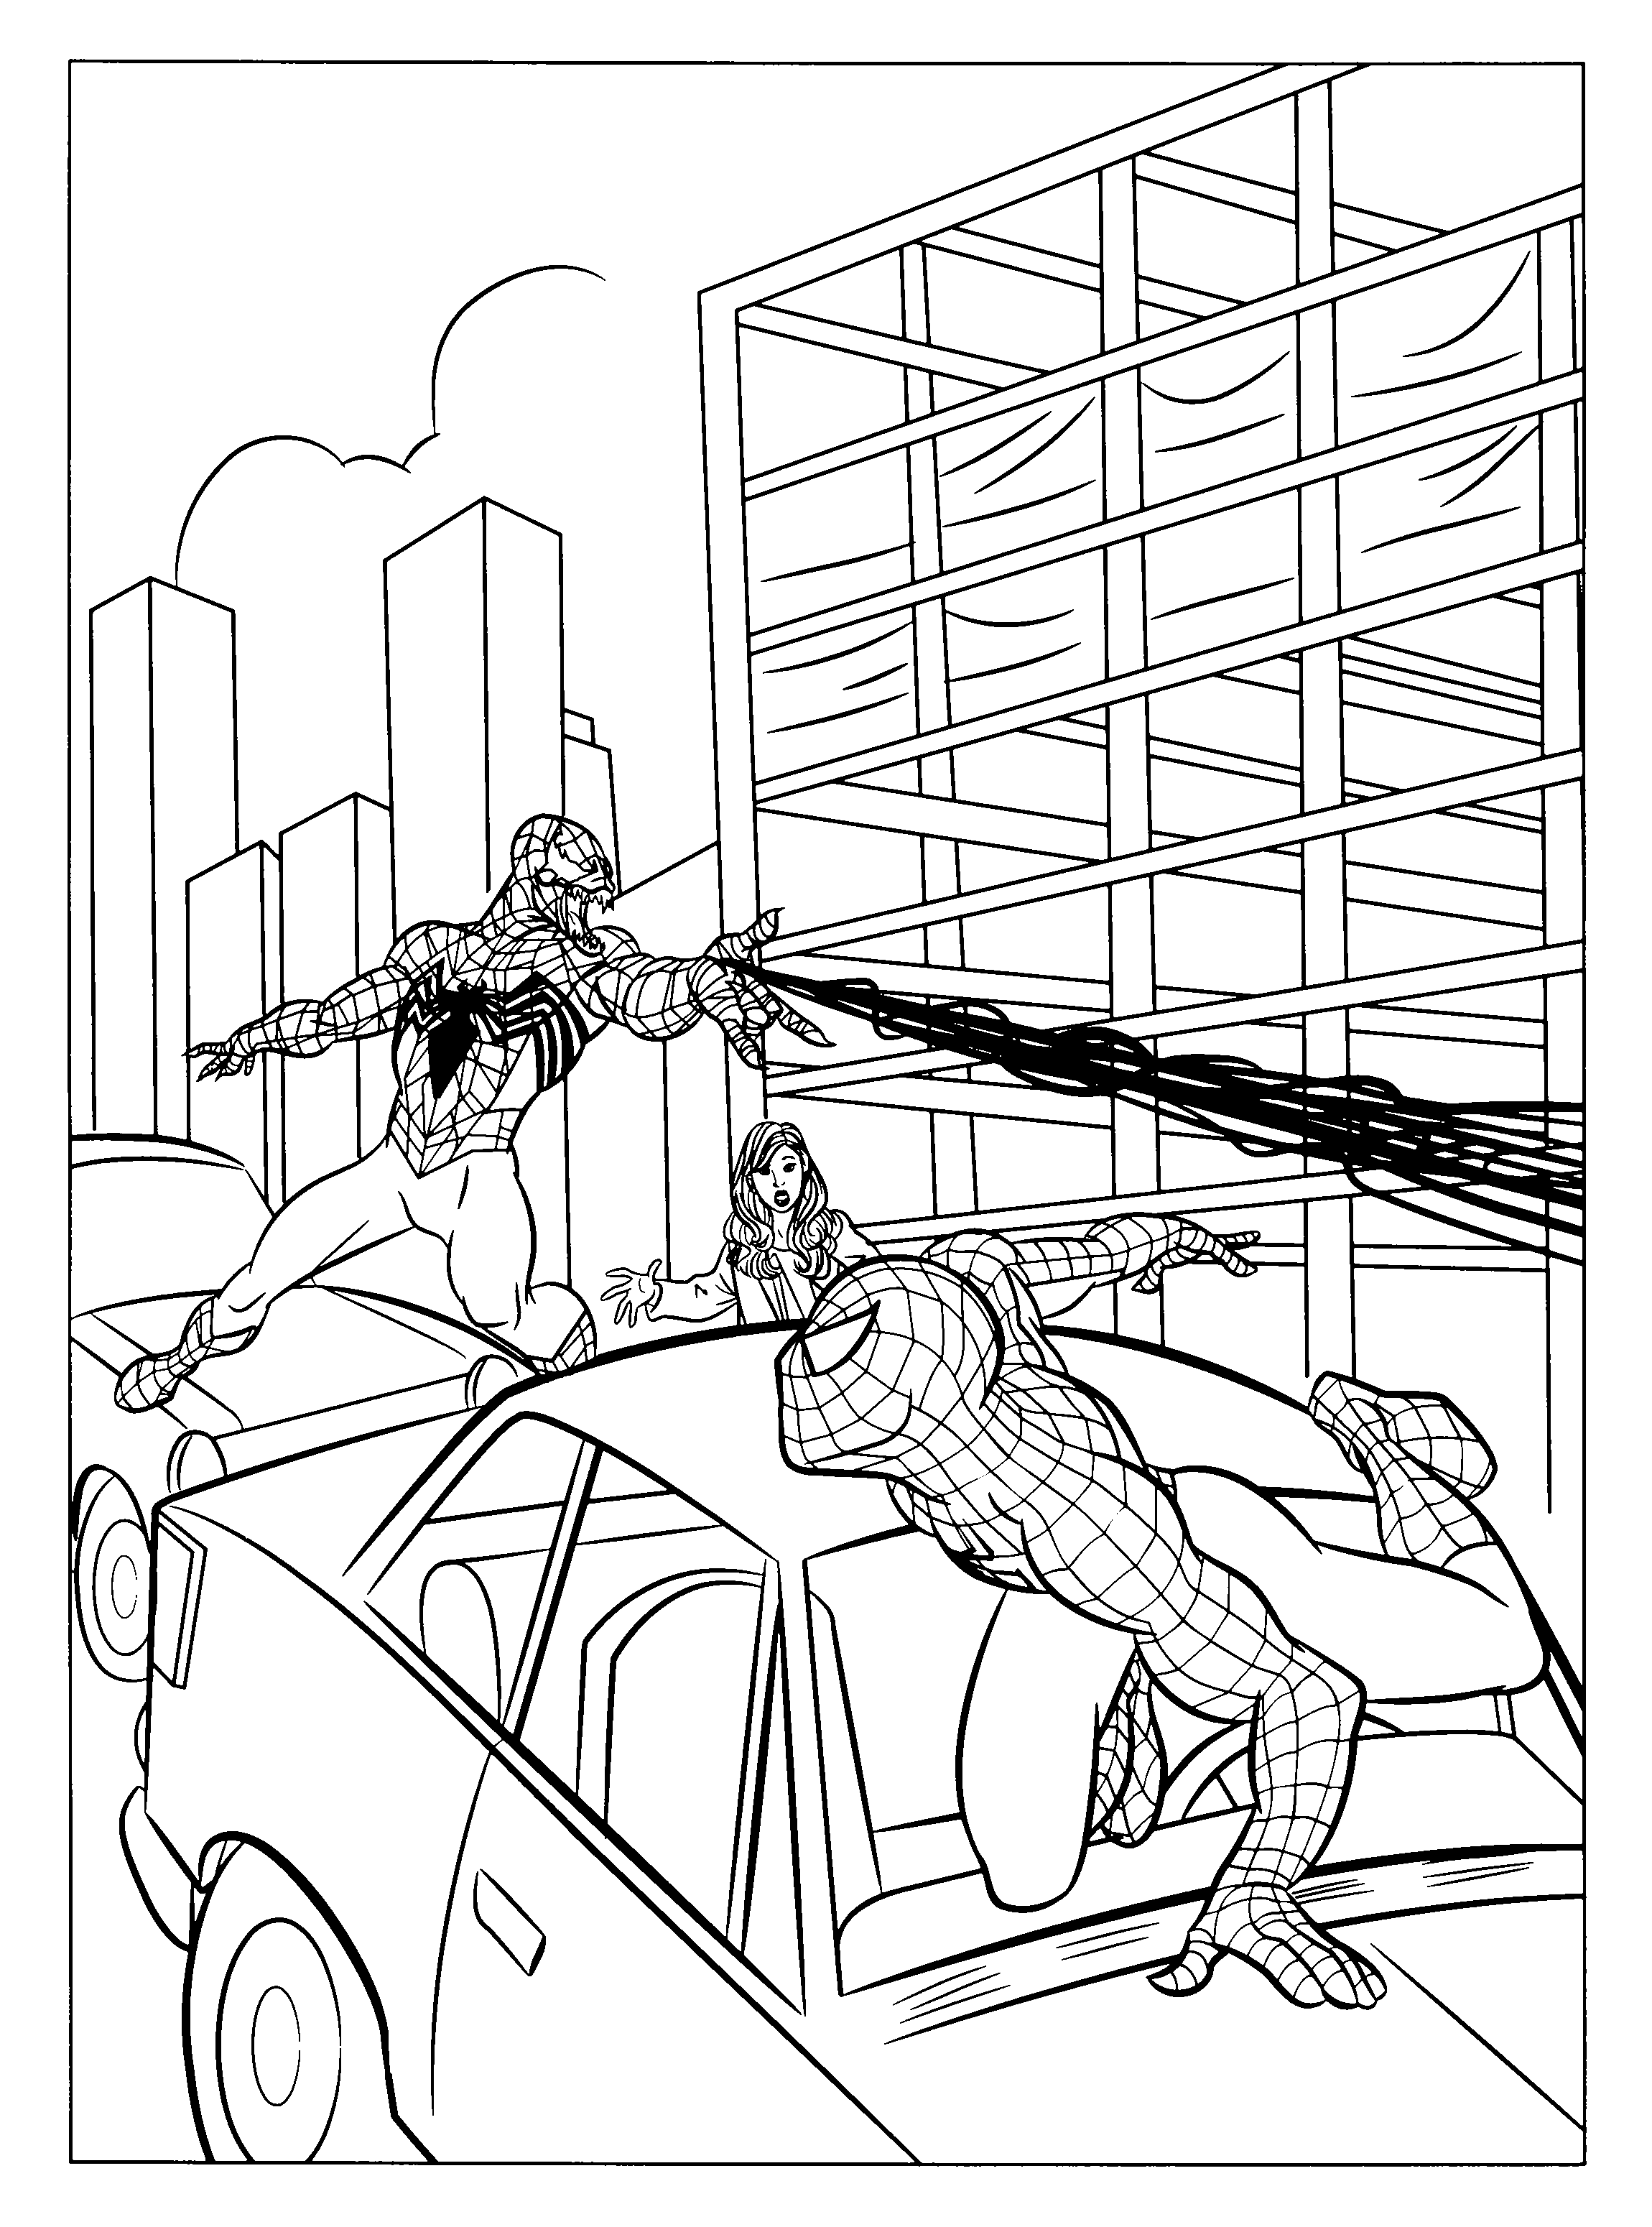 coloring page - spiderman 3 coloring pages 21